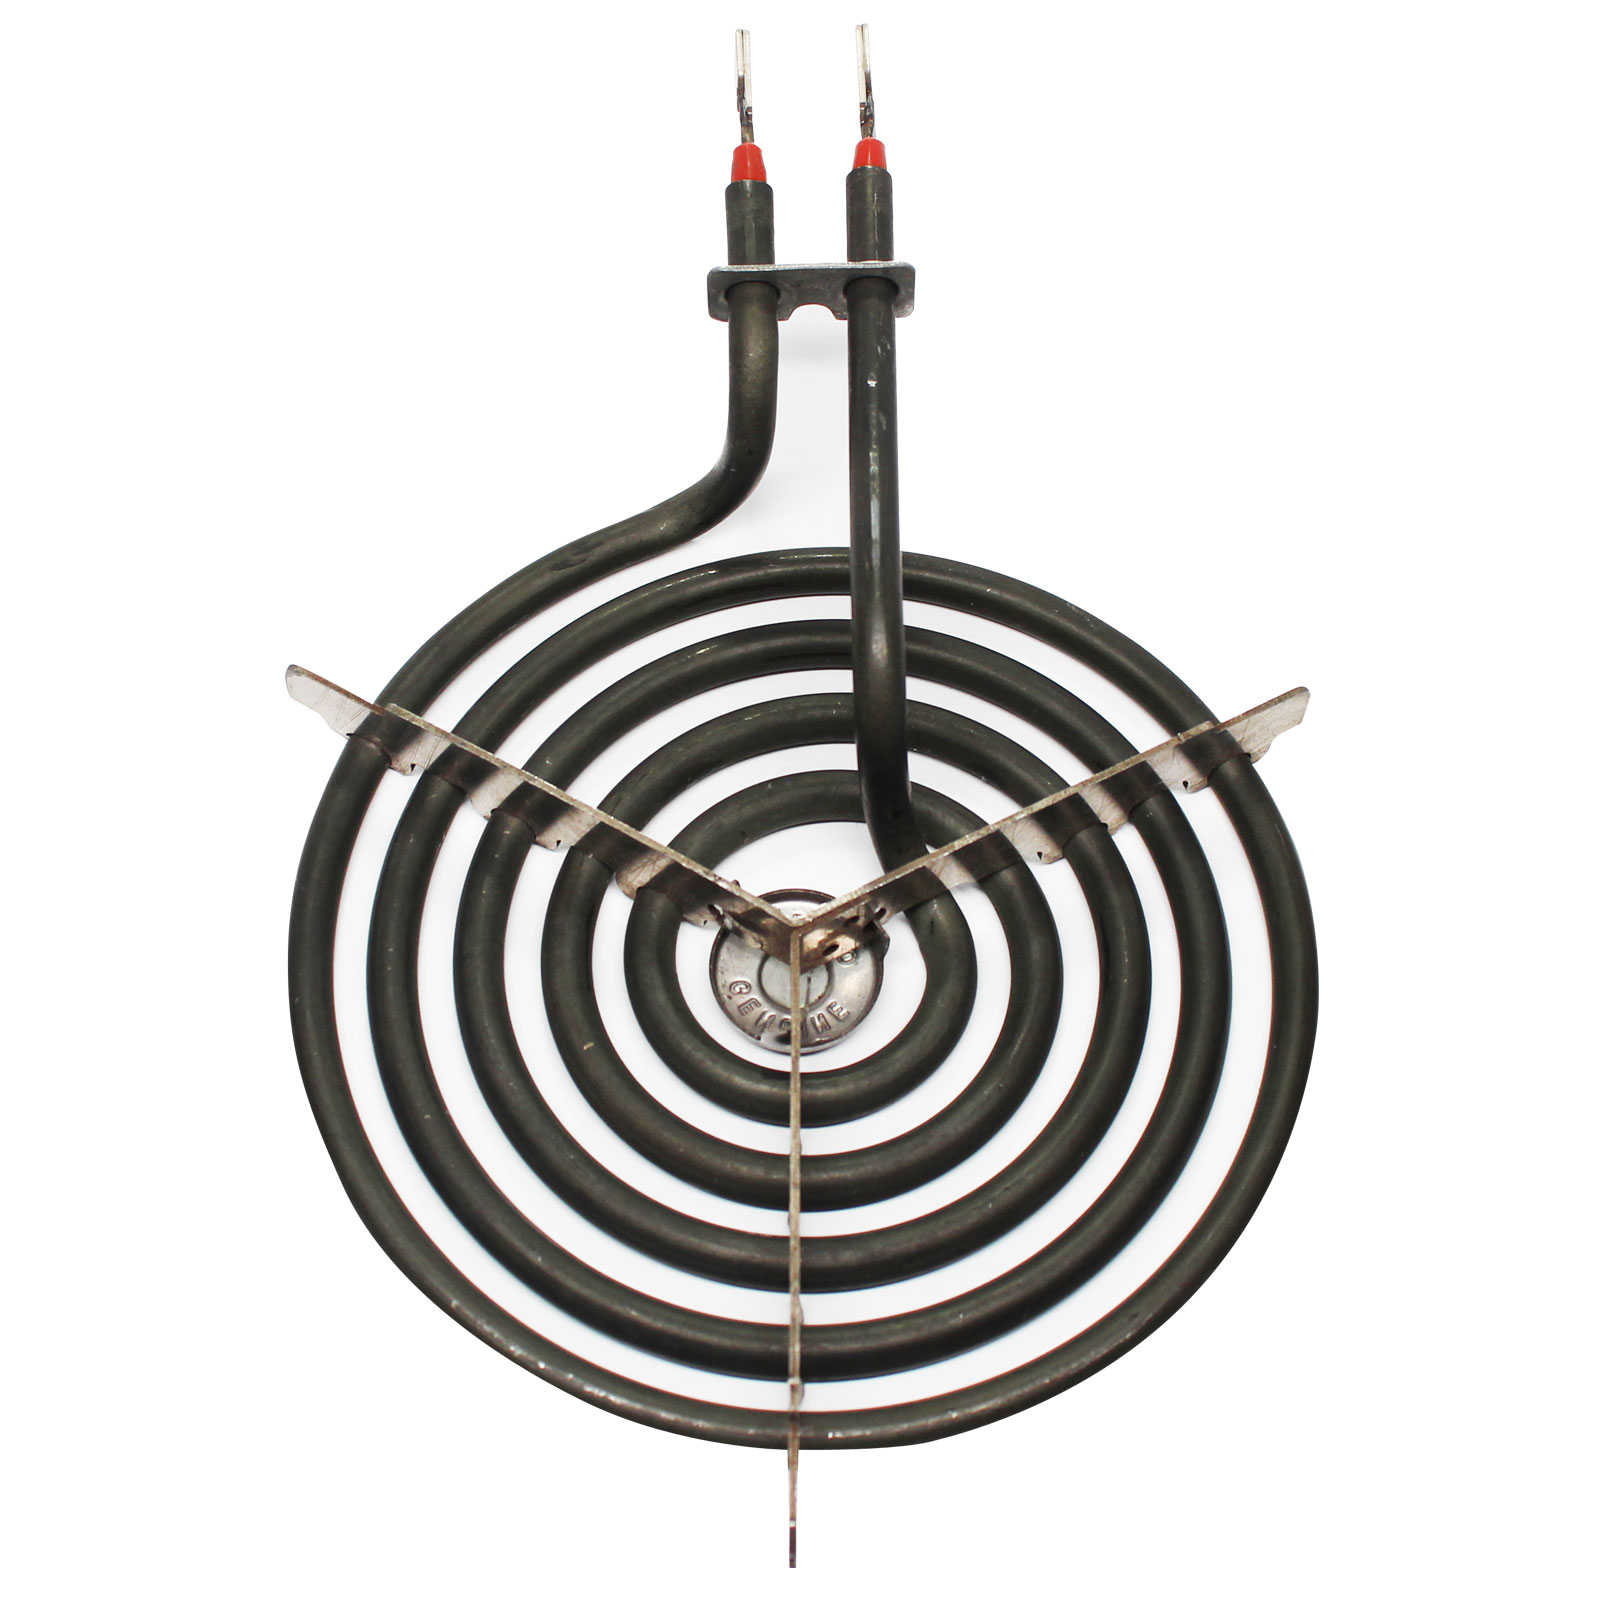 Compatible General Electric JP383B9R1BC 8 inch 6 Turns & 6 inch 5 Turns Surface Burner Elements - Compatible General Electric WB30M1 & WB30M2 Heating Element for Range, Stove & Cooktop - image 2 of 4